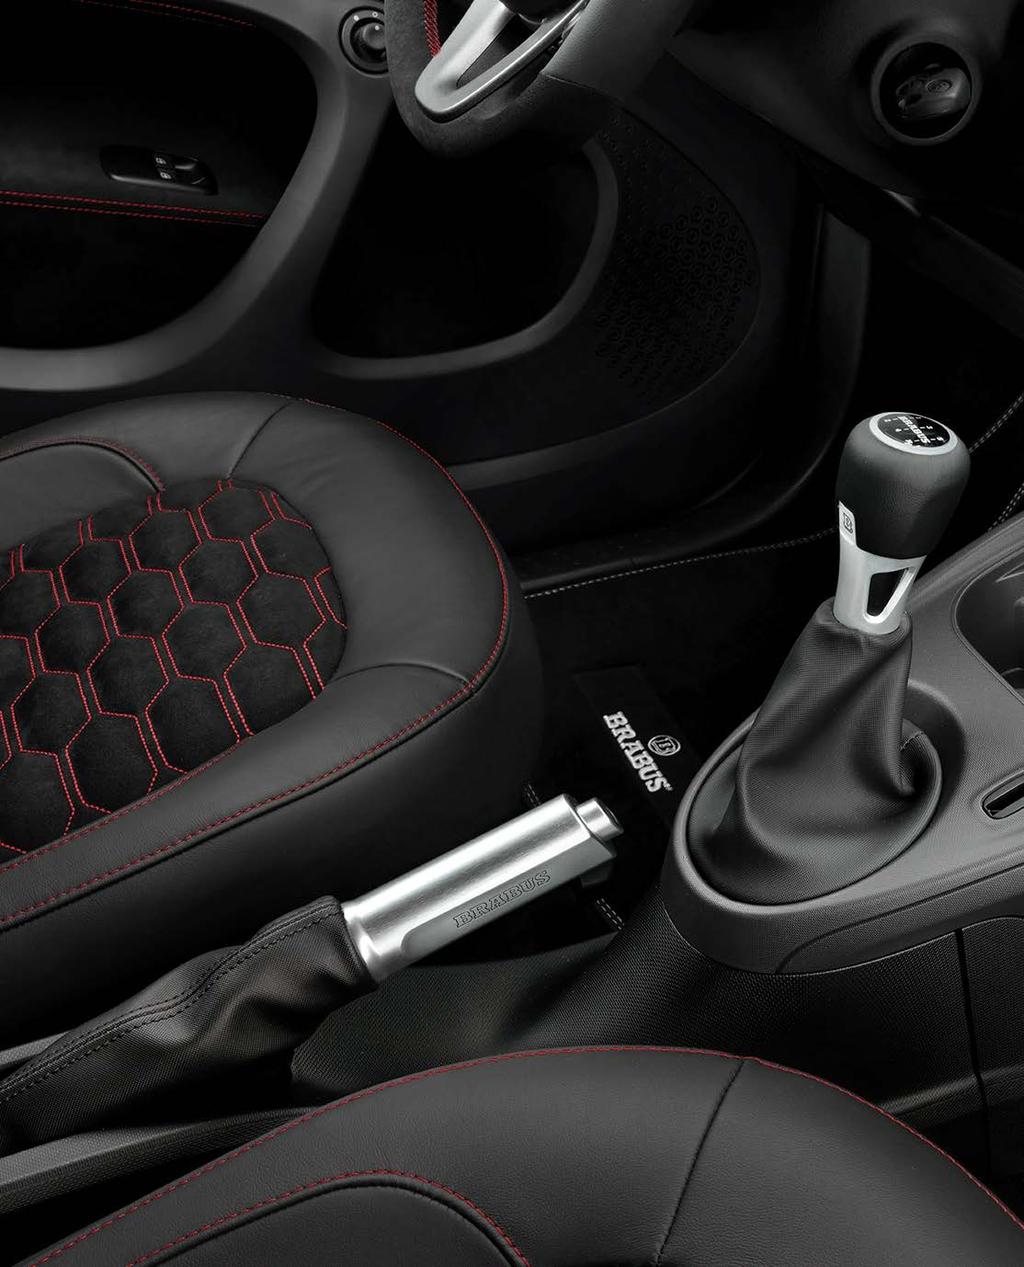 BRABUS 16 Gearshift paddles. For a sporty look and dynamic gear-shifting driving fun included.